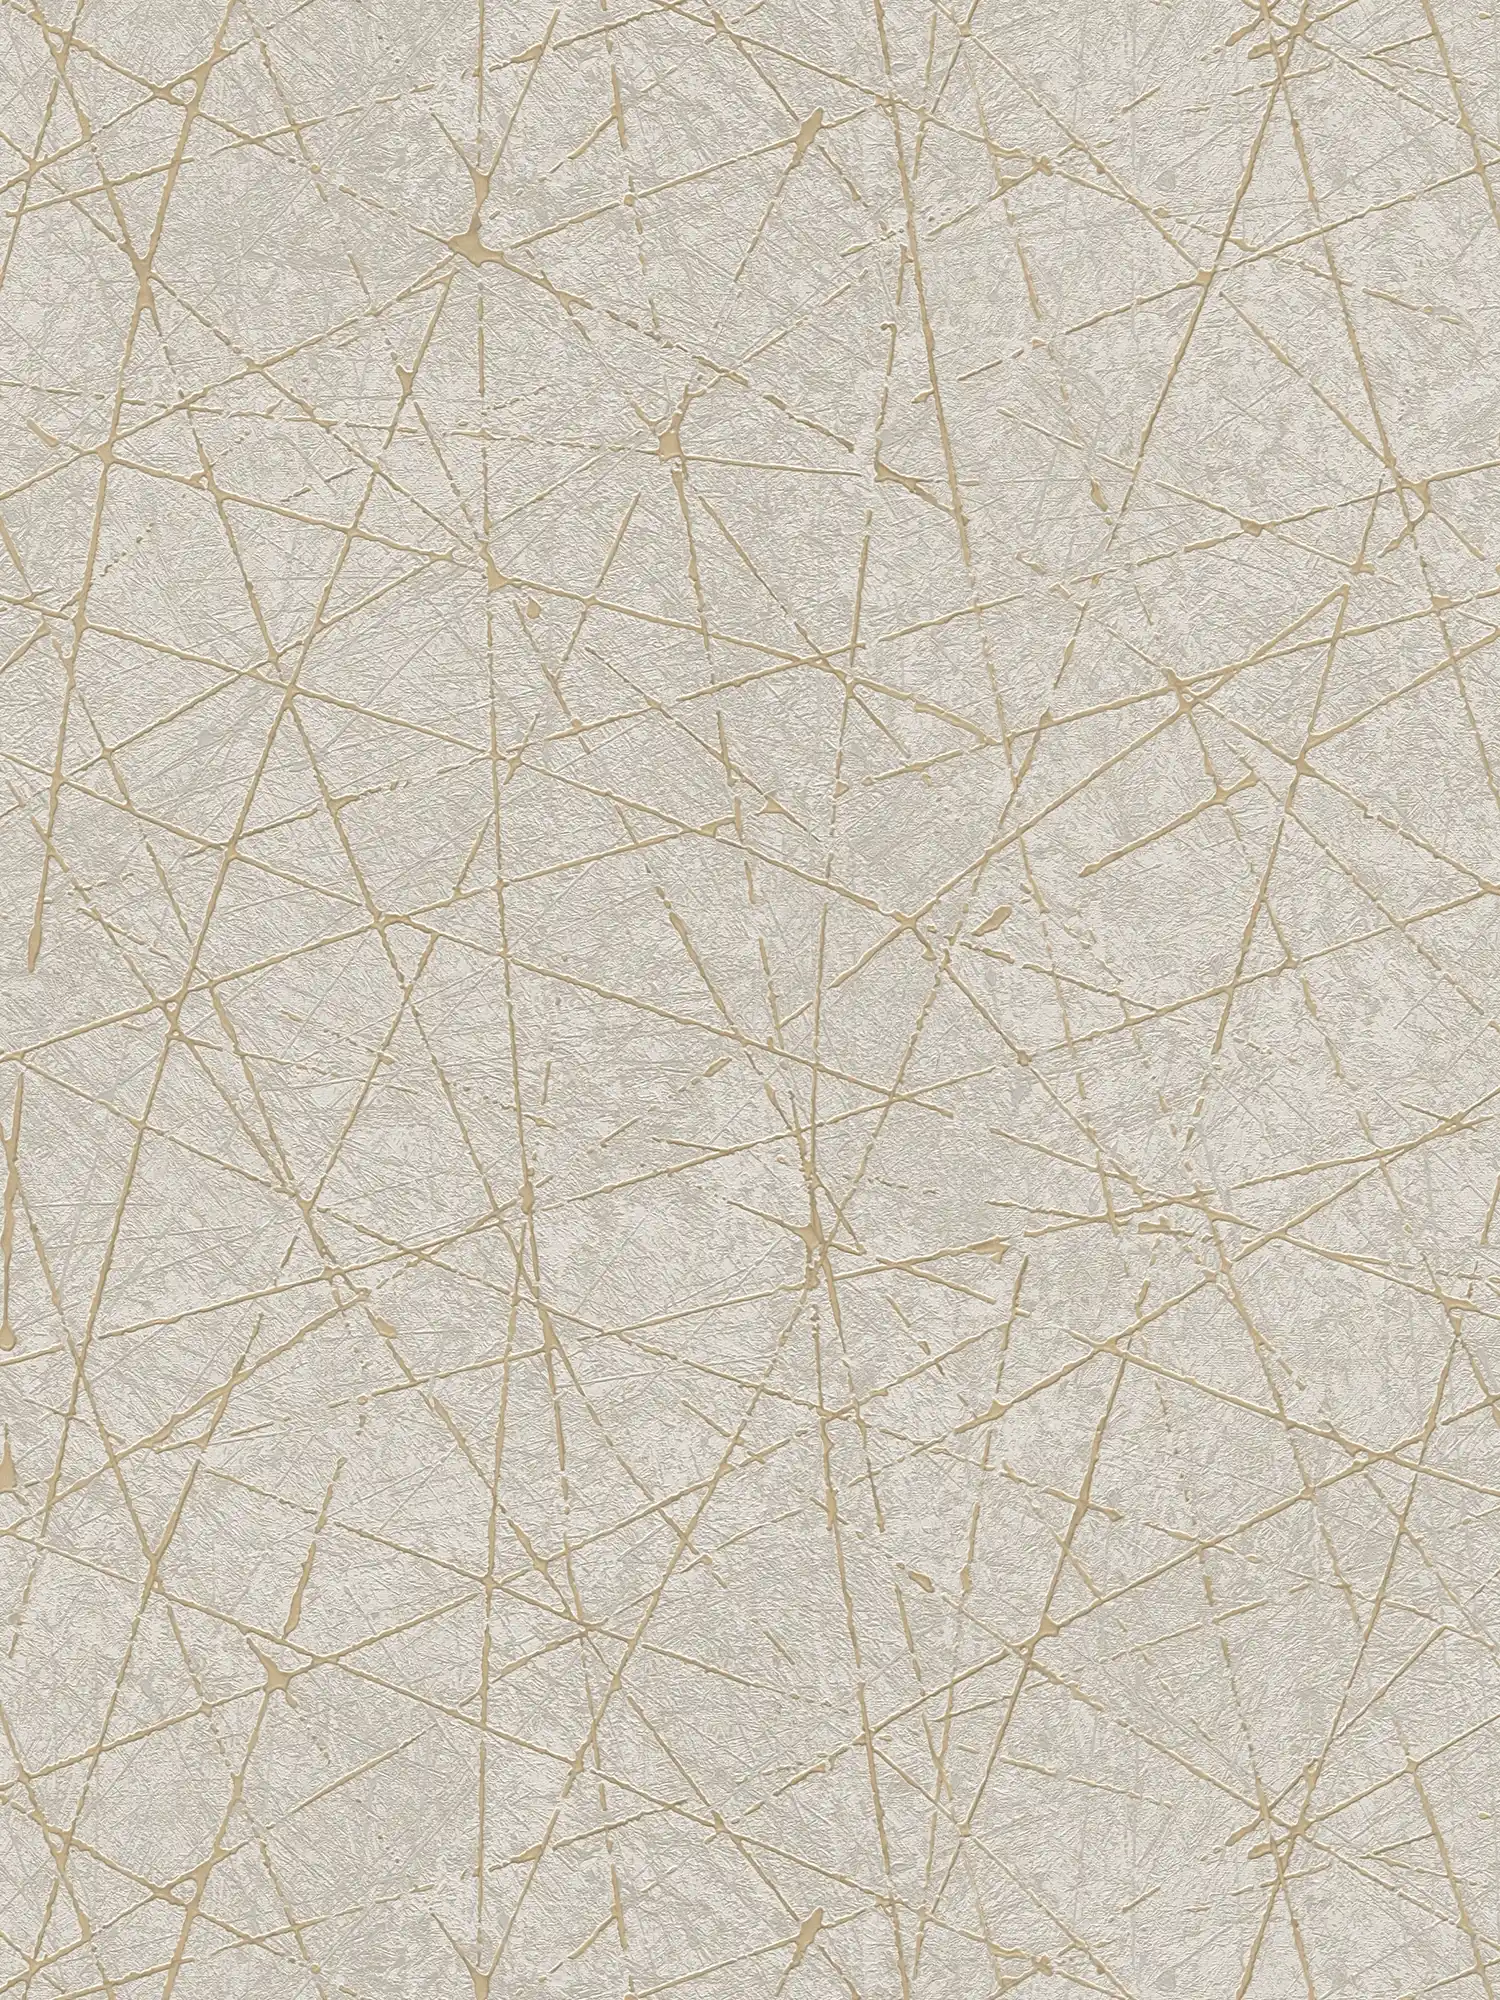         Non-woven wallpaper with graphic lines & metallic effect - cream, grey, gold
    